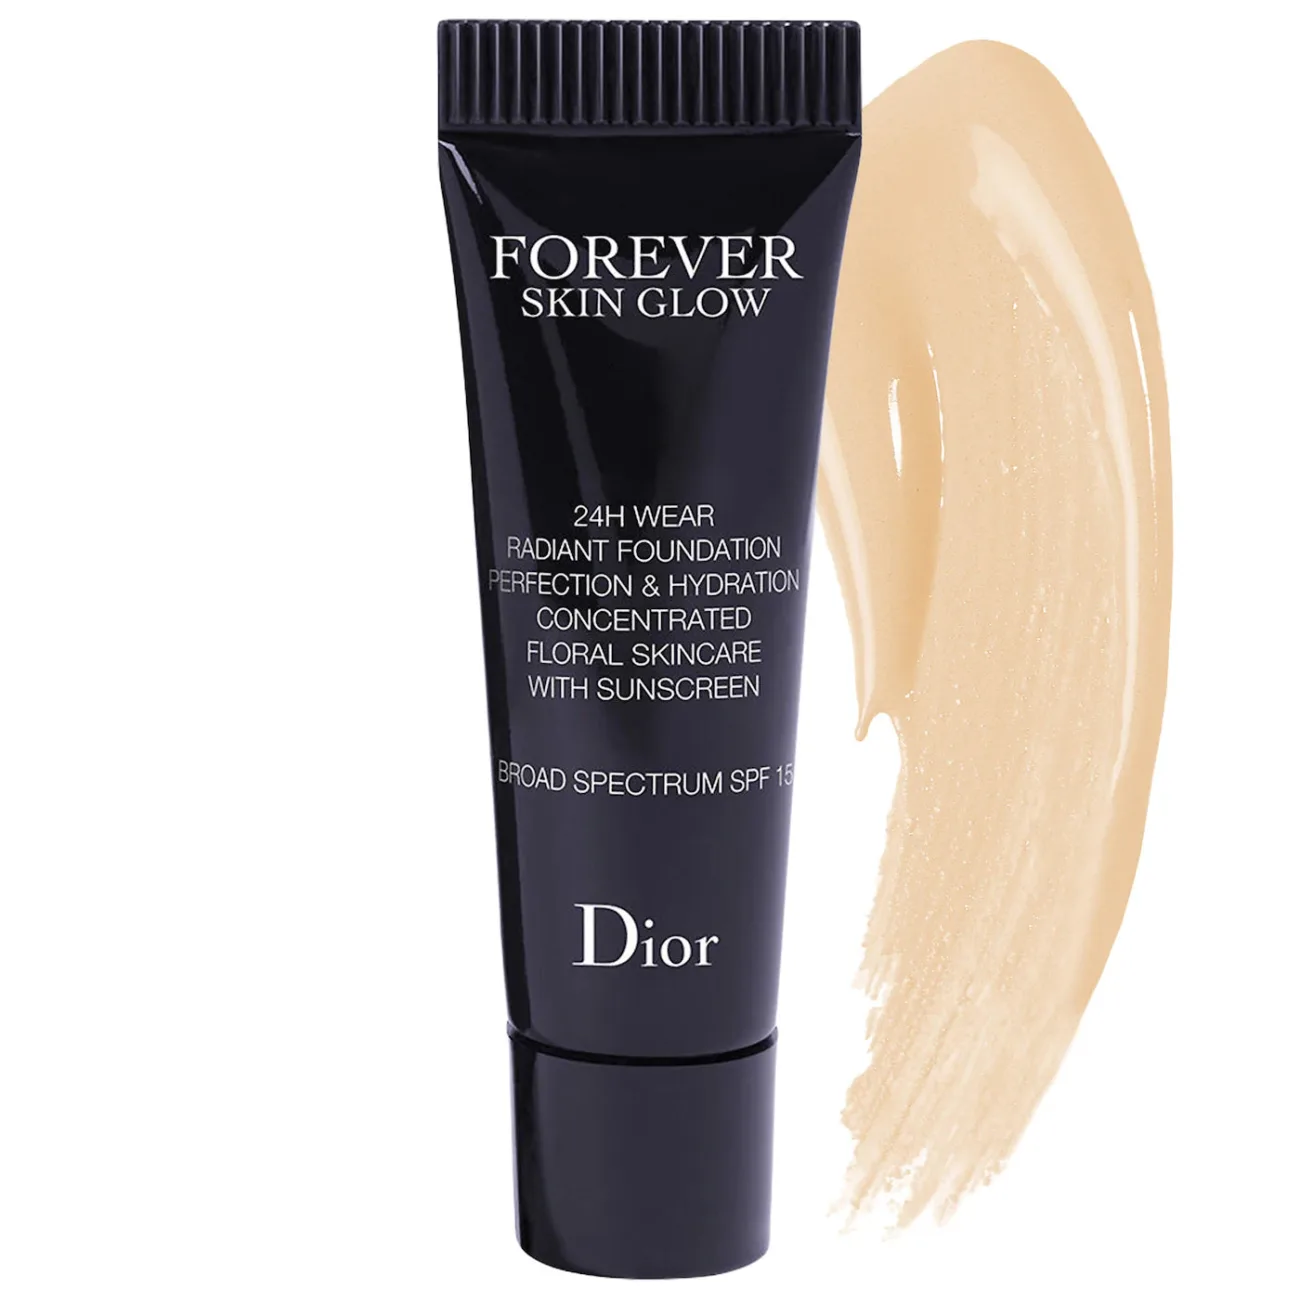 Forever Skin Glow Foundation trial size - 2N-DIOR